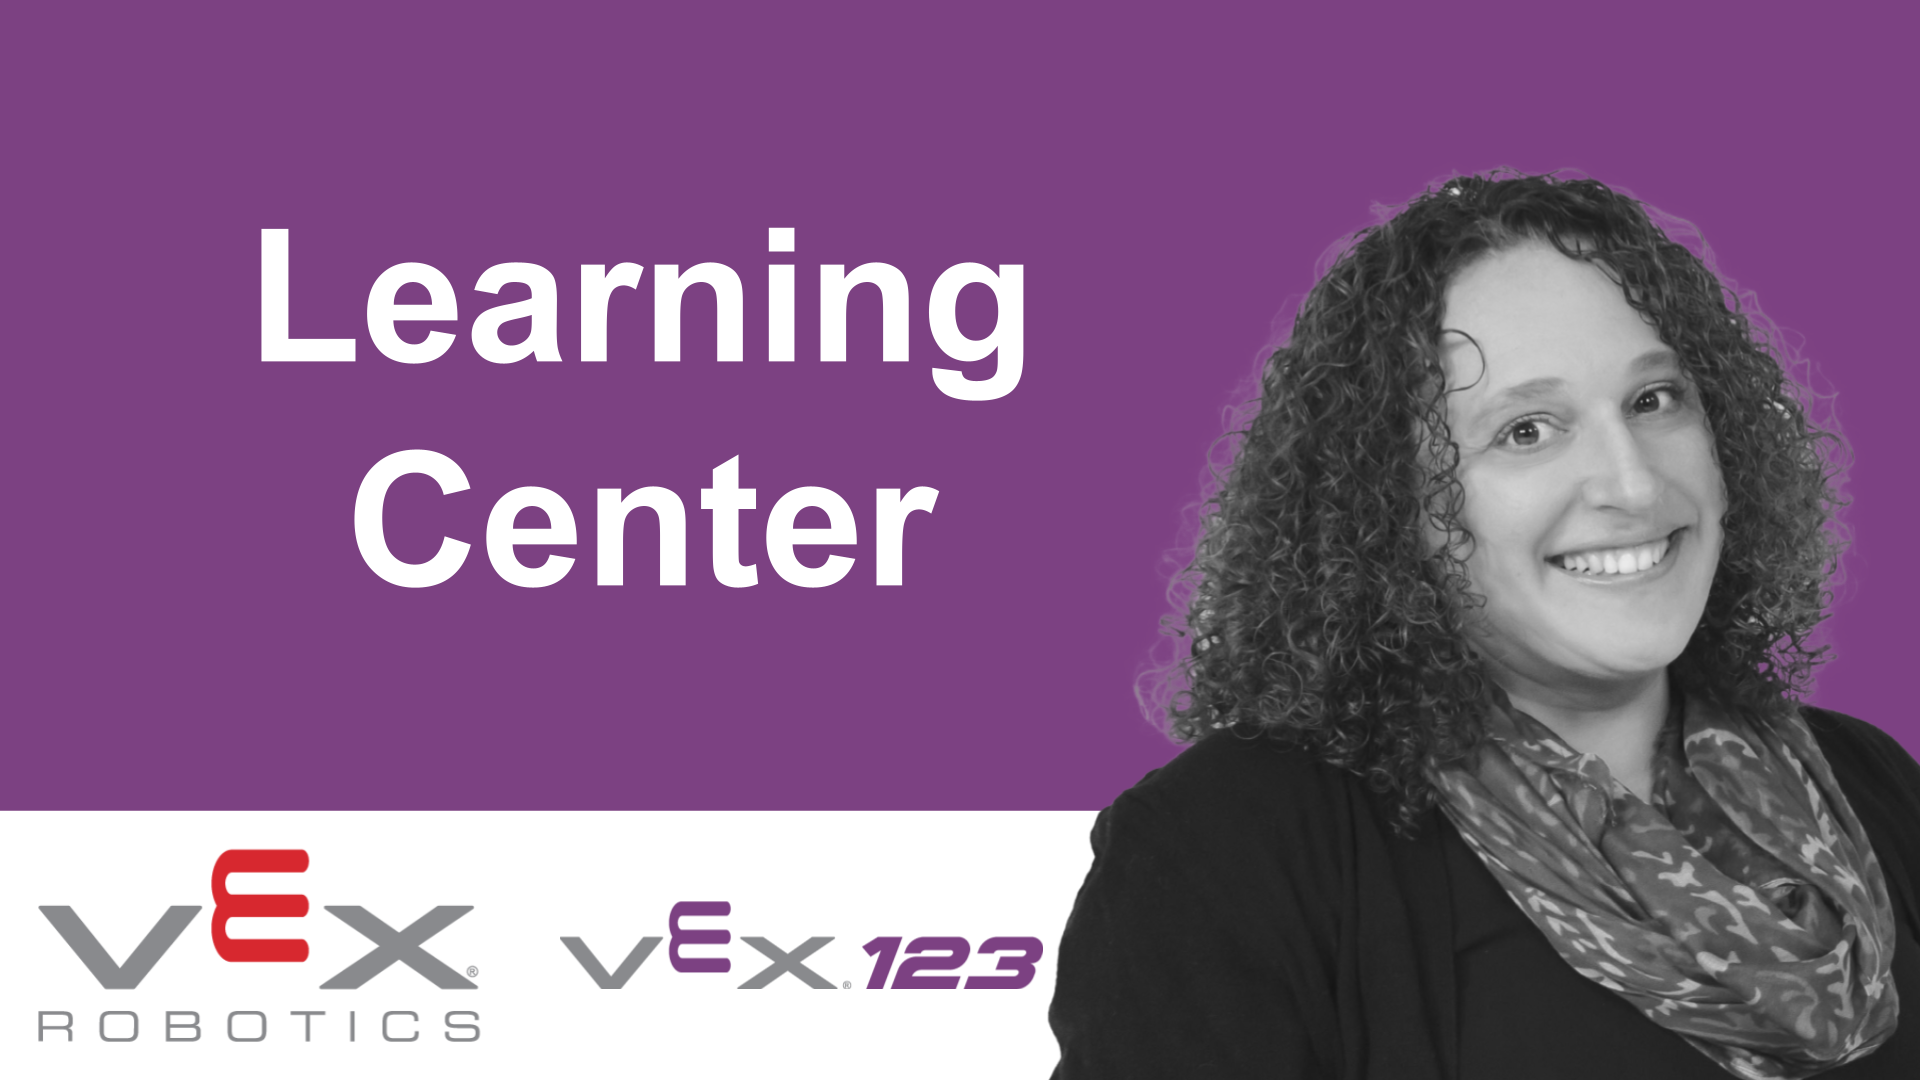 Building a VEX 123 Learning Center